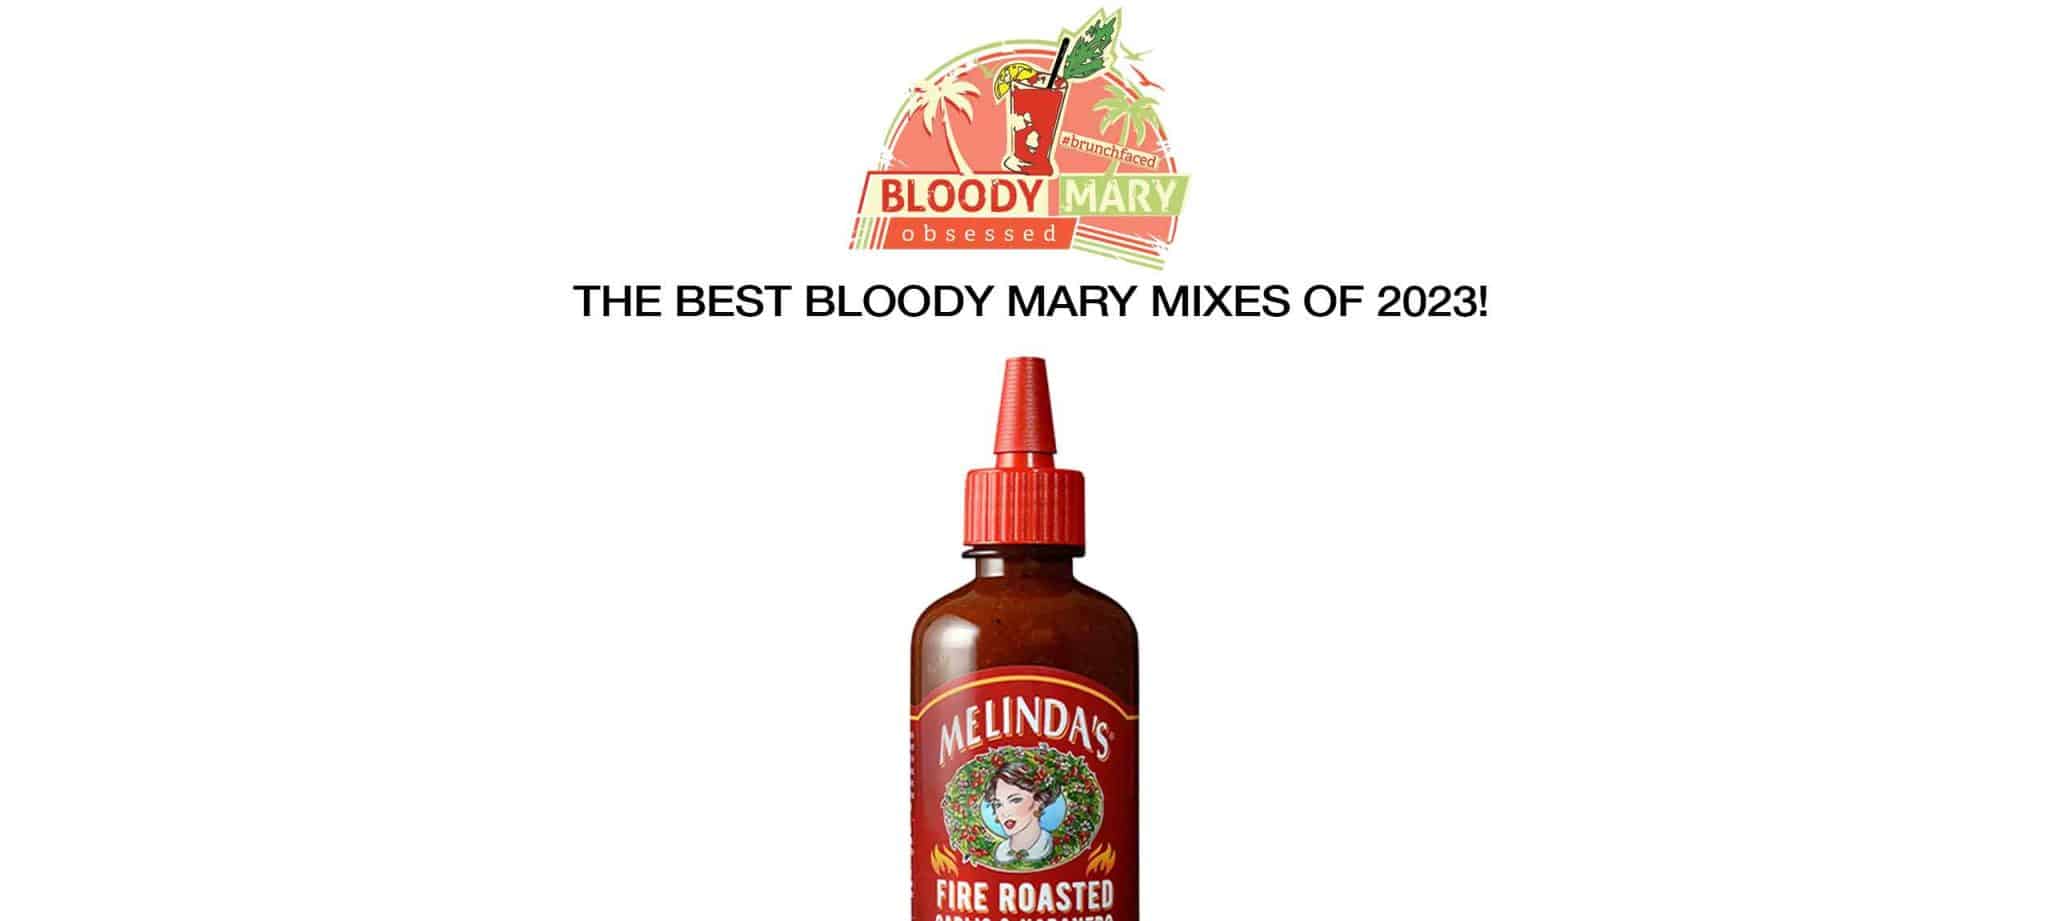 The Best Bloody Mary Mixes of 2023 | Says Bloody Mary Obsessed